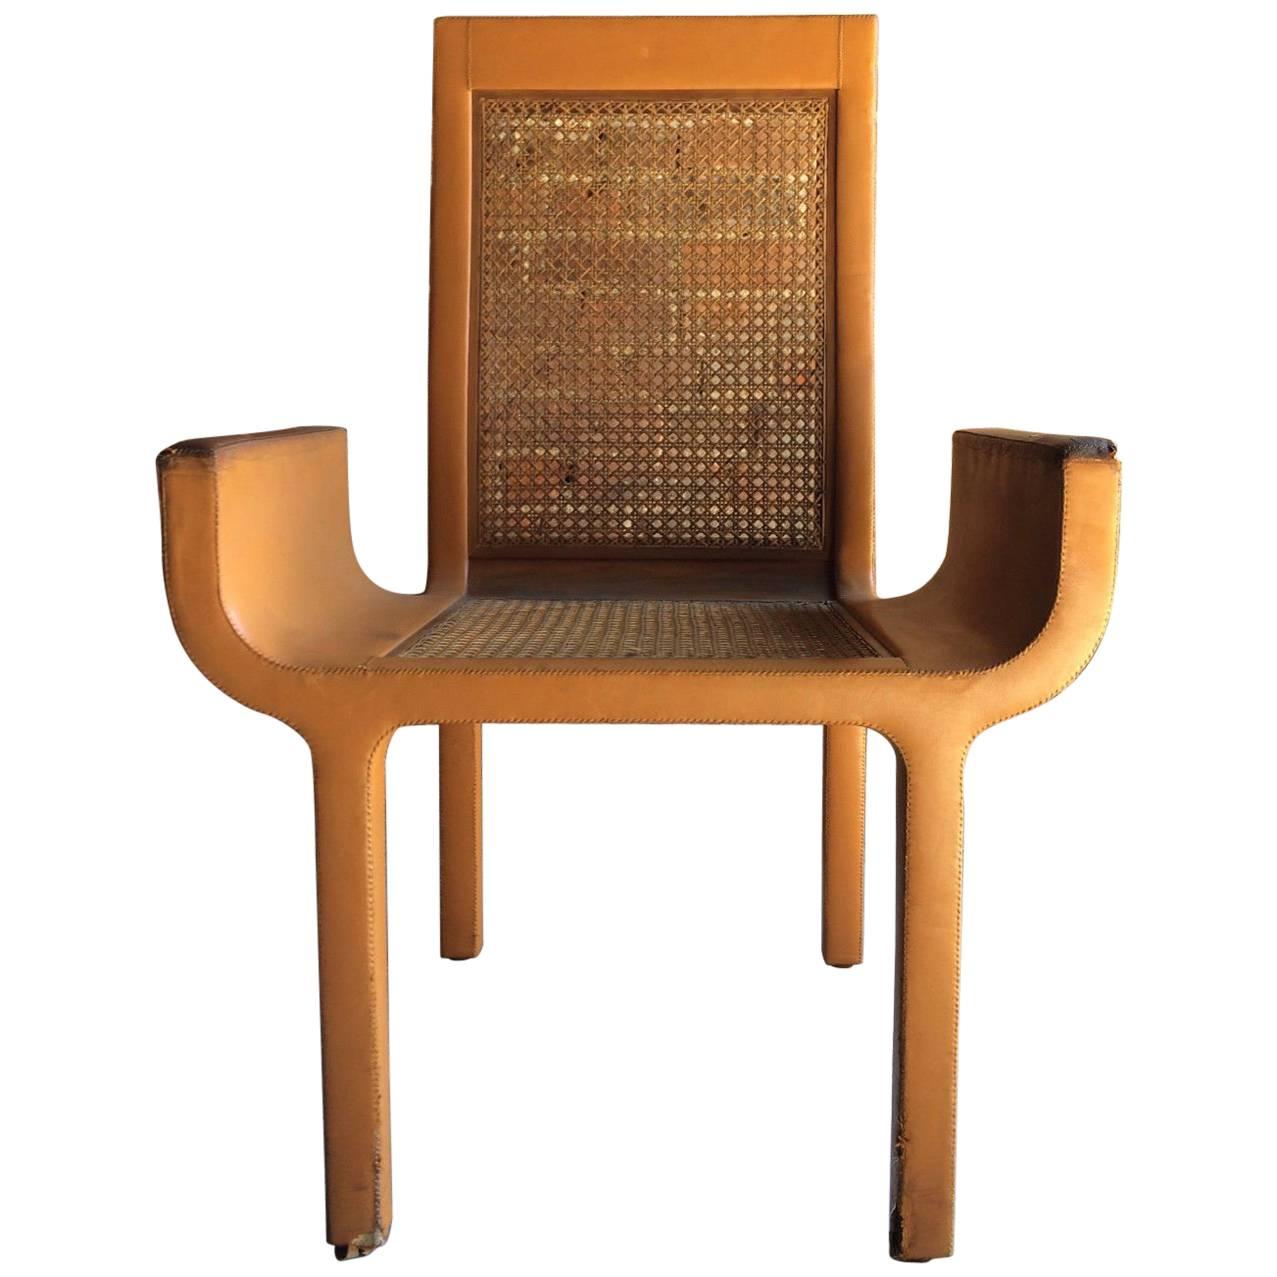 John Makepeace Tan Leather & Beech Armchair Chair Unique Rare Stamped